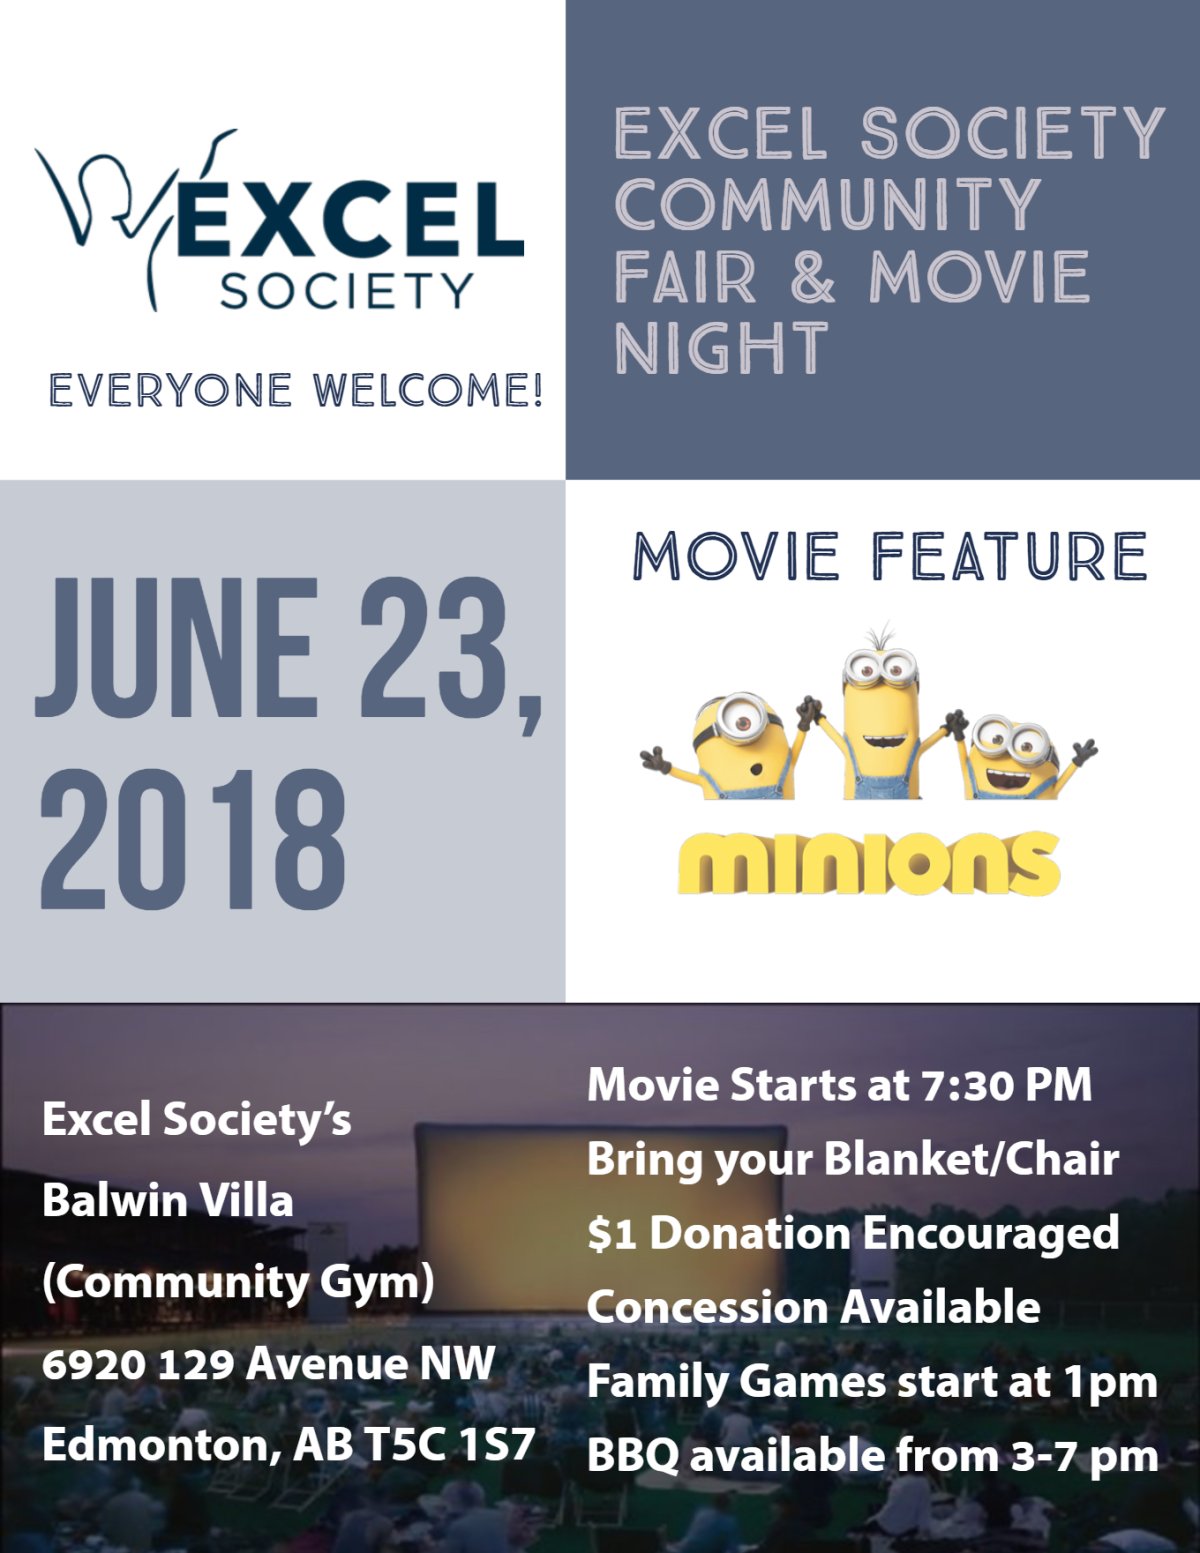 Excel Society Community Fair and Movie Night - image